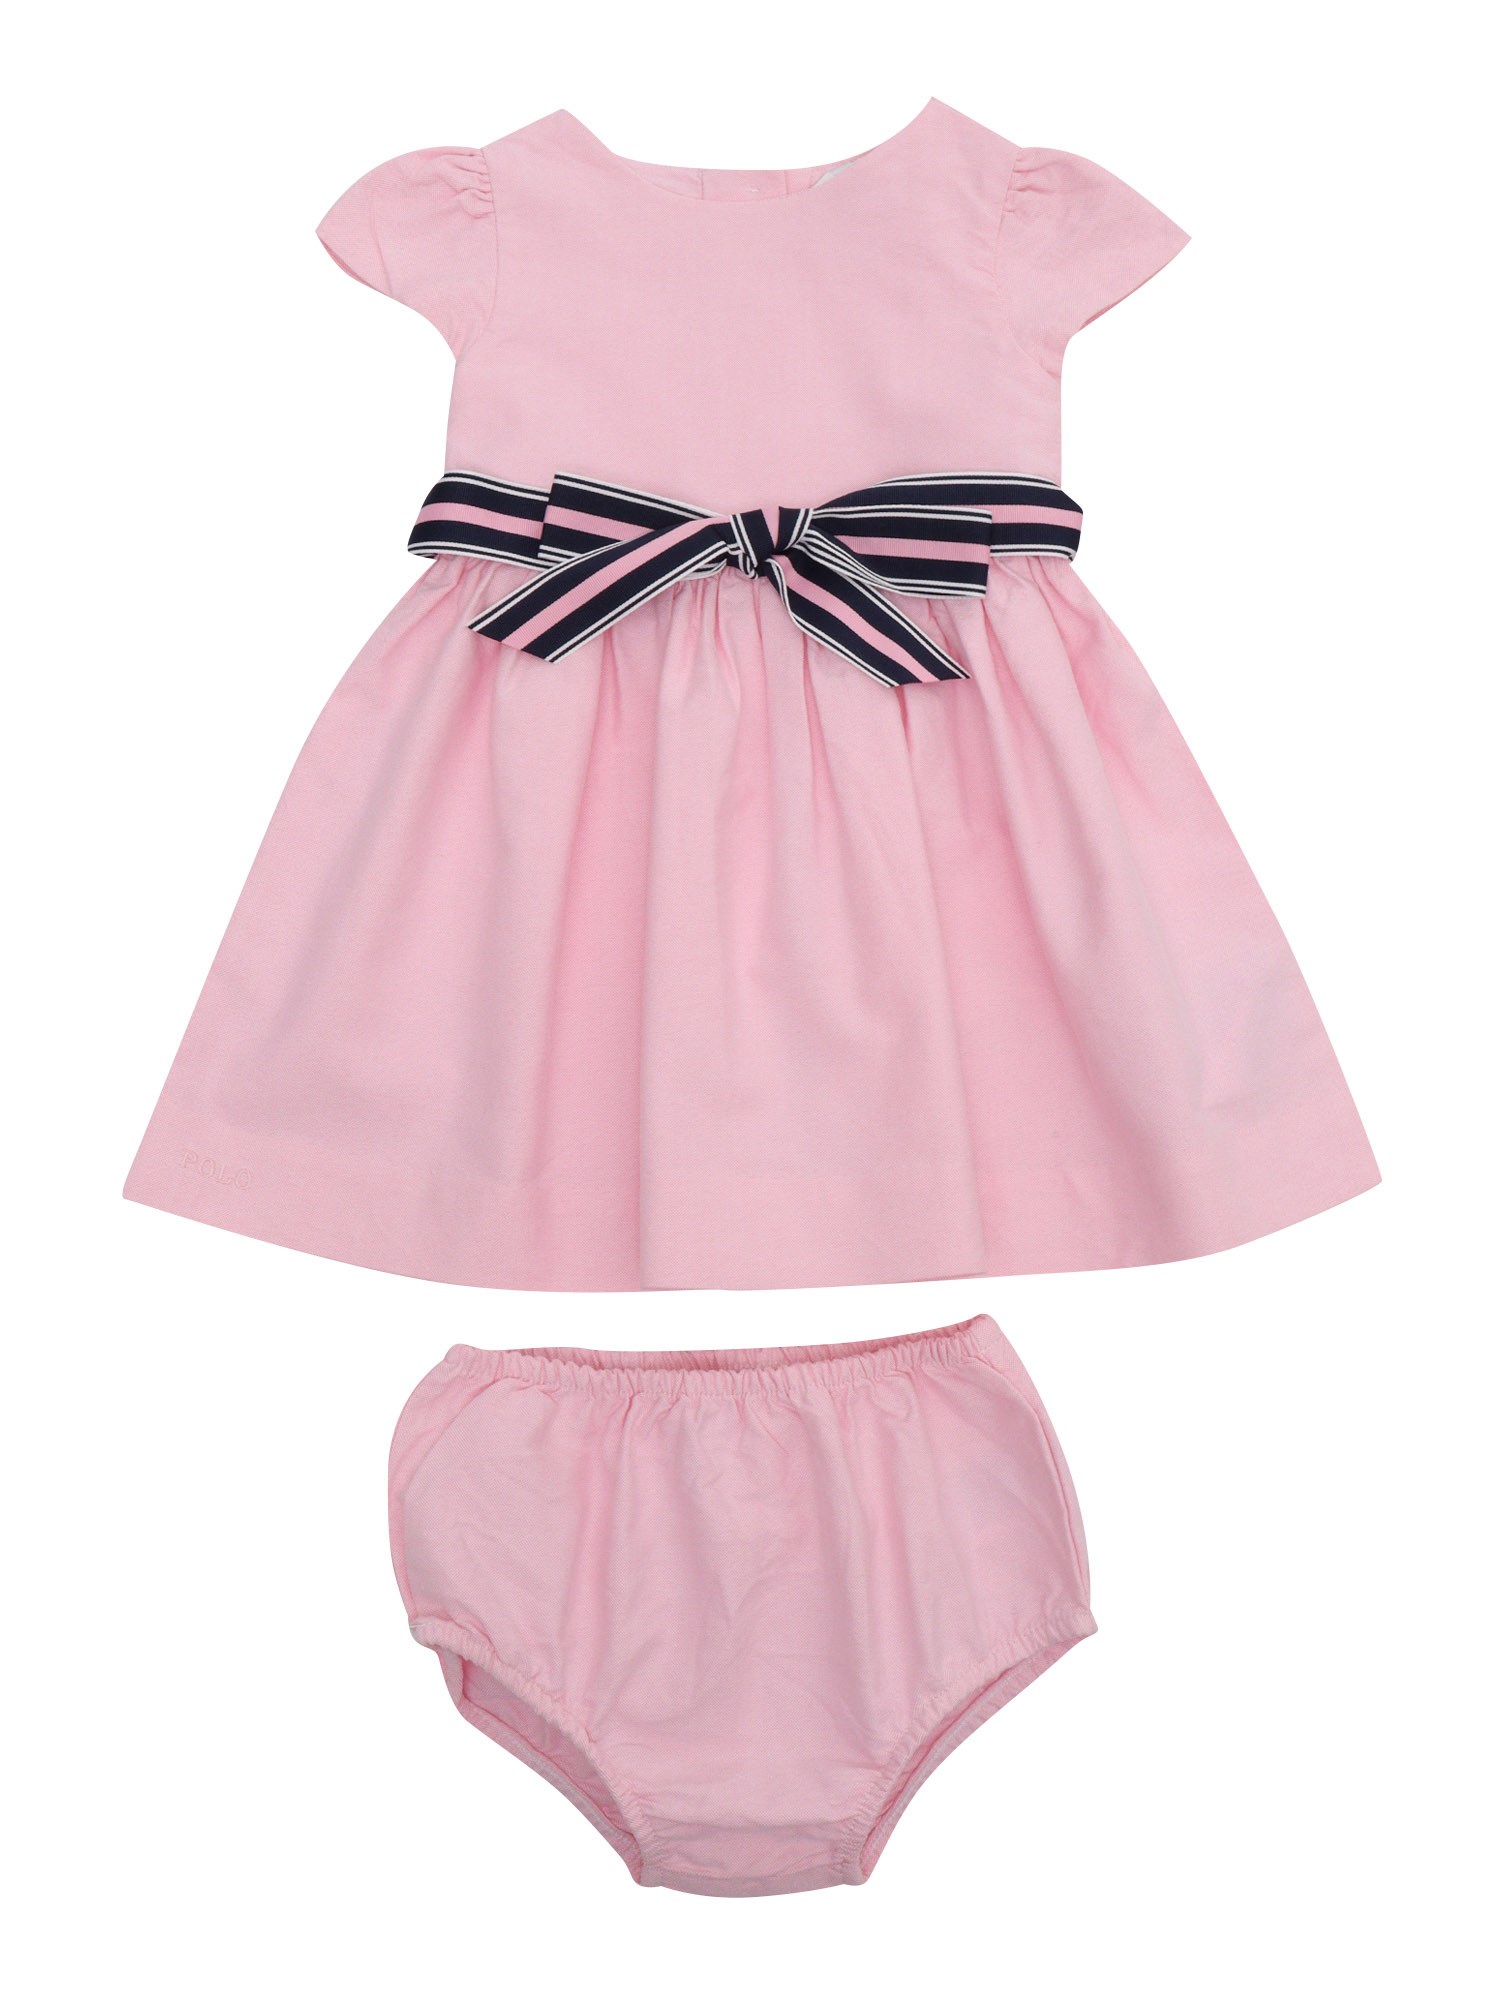 Polo Ralph Lauren Pink Dress With Bow